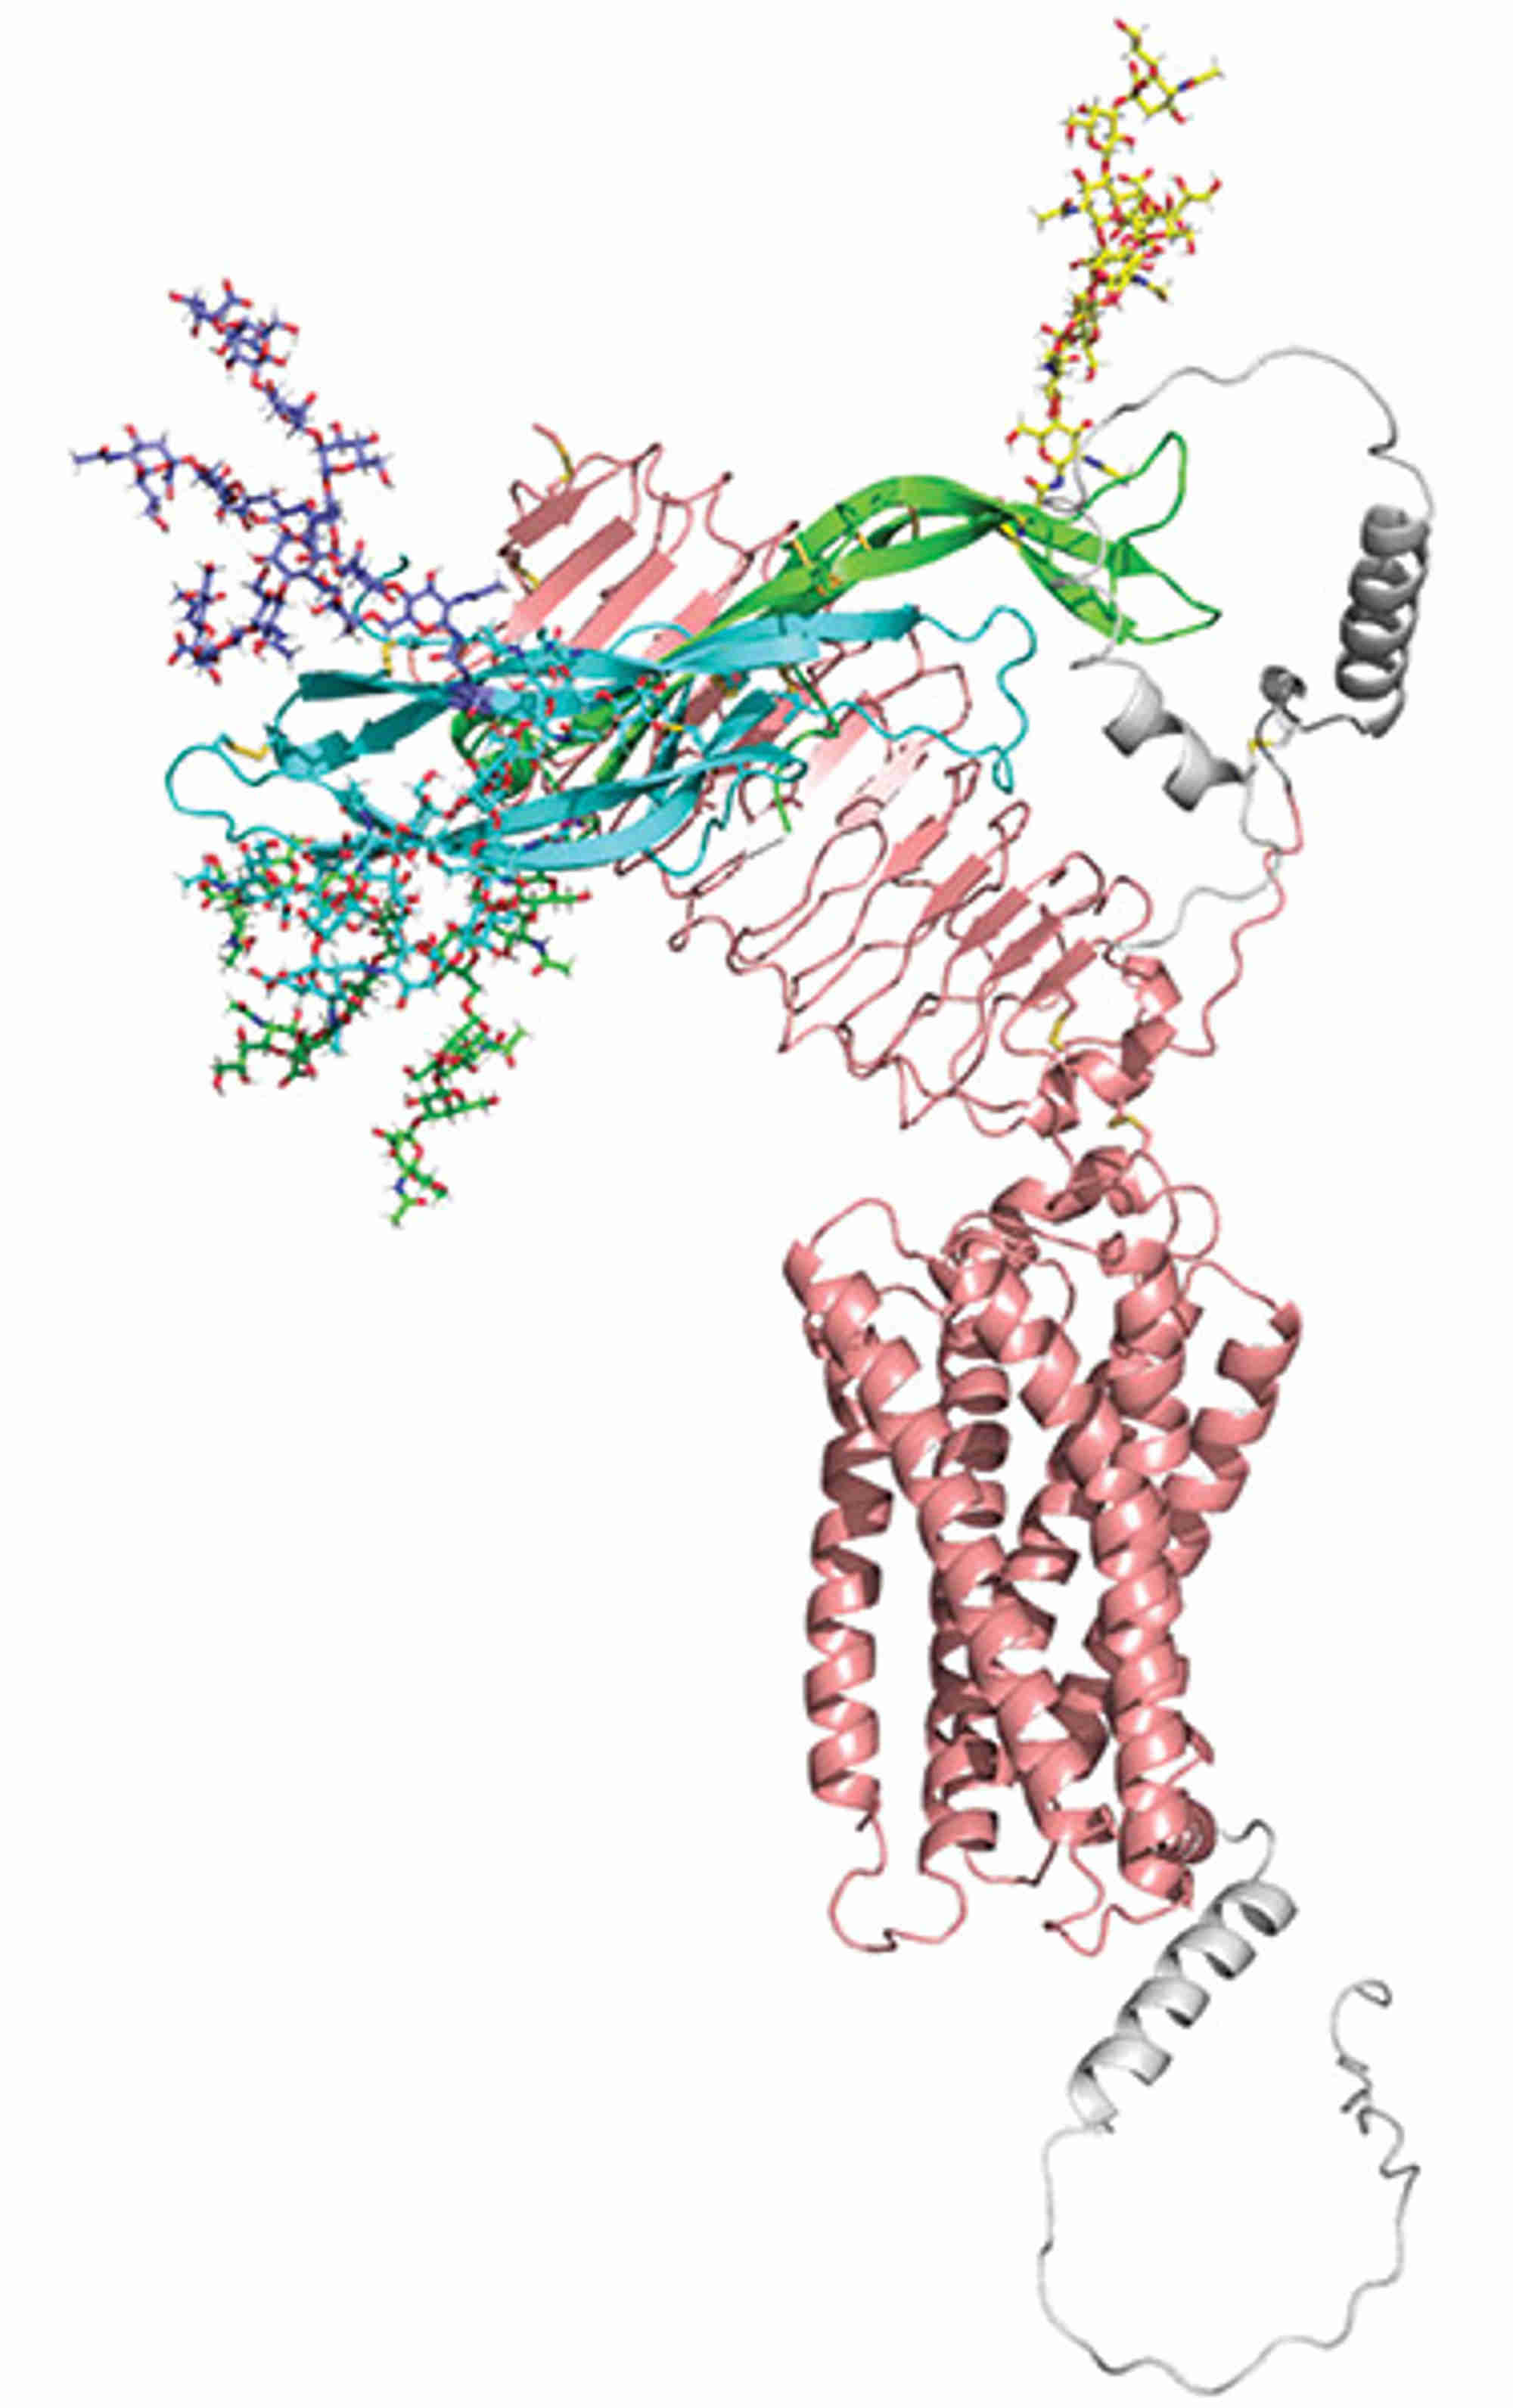 Figure. Fully glycosylated FSH model with the AlphaFold model of FSHR, illustrating relative sizes of FSH glycans and the hormone, and apparent lack of direct glycan contact with receptor. The AlphaFold model was used because some of the FSHR is missing in the structure. FSHα, green; FSHβ, cyan; FSHR, pink; residues missing from cryo-EM structures, grey. Glycan models were created in GLYCAM (www.glycam.org) and are shown as sticks. FSHα: Asn-52, green; Asn-78, yellow. FSHβ: Asn-7, cyan; Asn-24, blue.